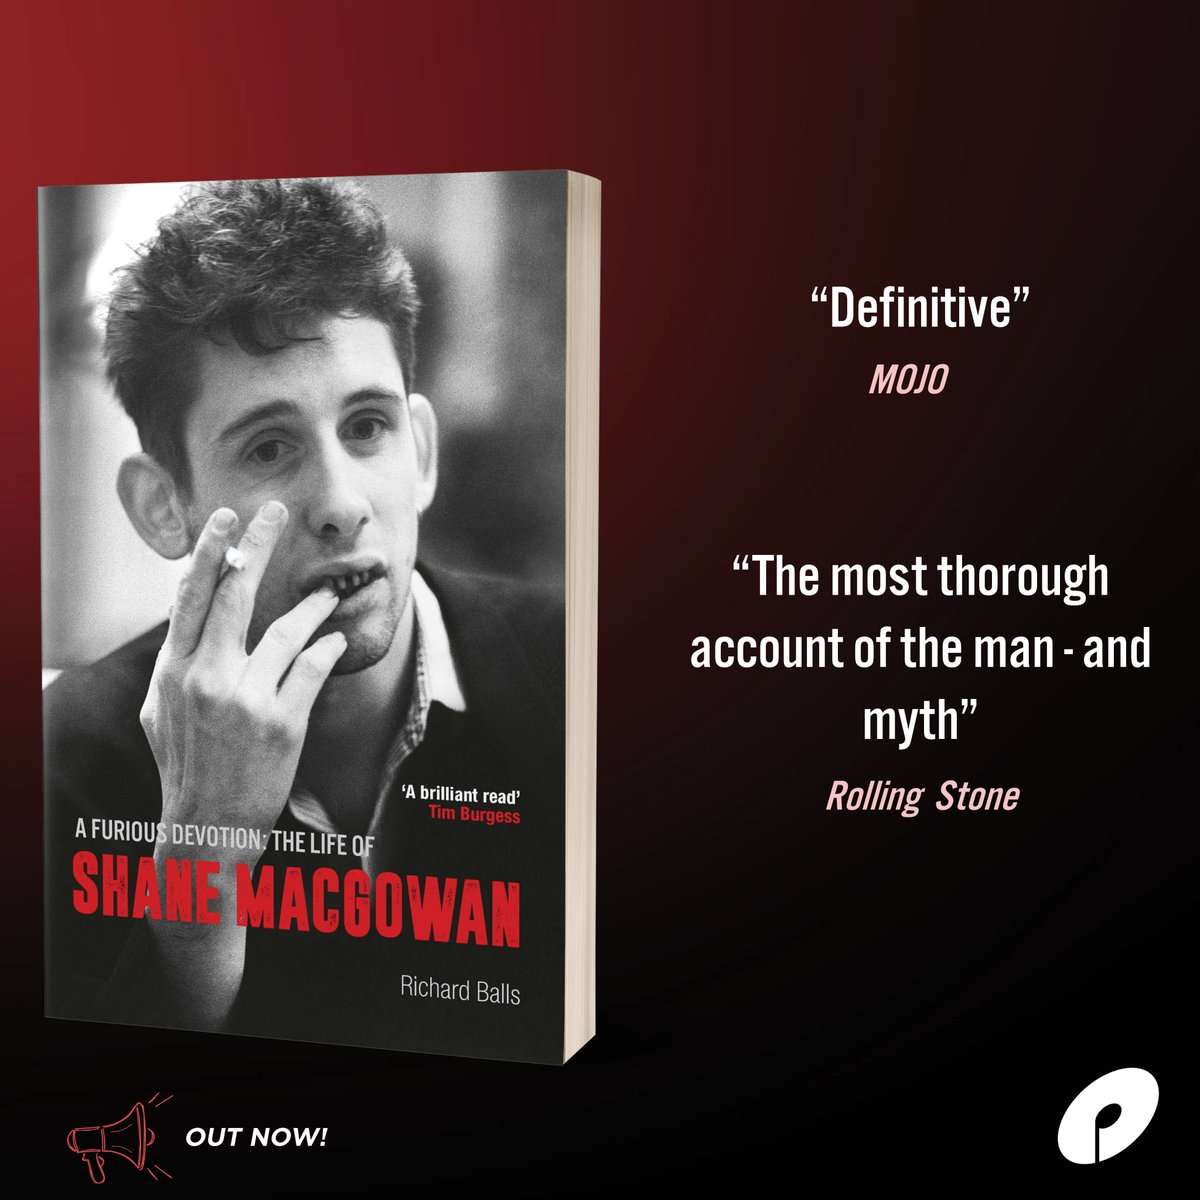 Richard Balls' definitive biography of Shane MacGowan is now in paperback, with an extra chapter covering the last year of his life, the funeral and the incredible global response to his passing. Out now in the UK - June in North America. More info: found.ee/ShaneMacGowan